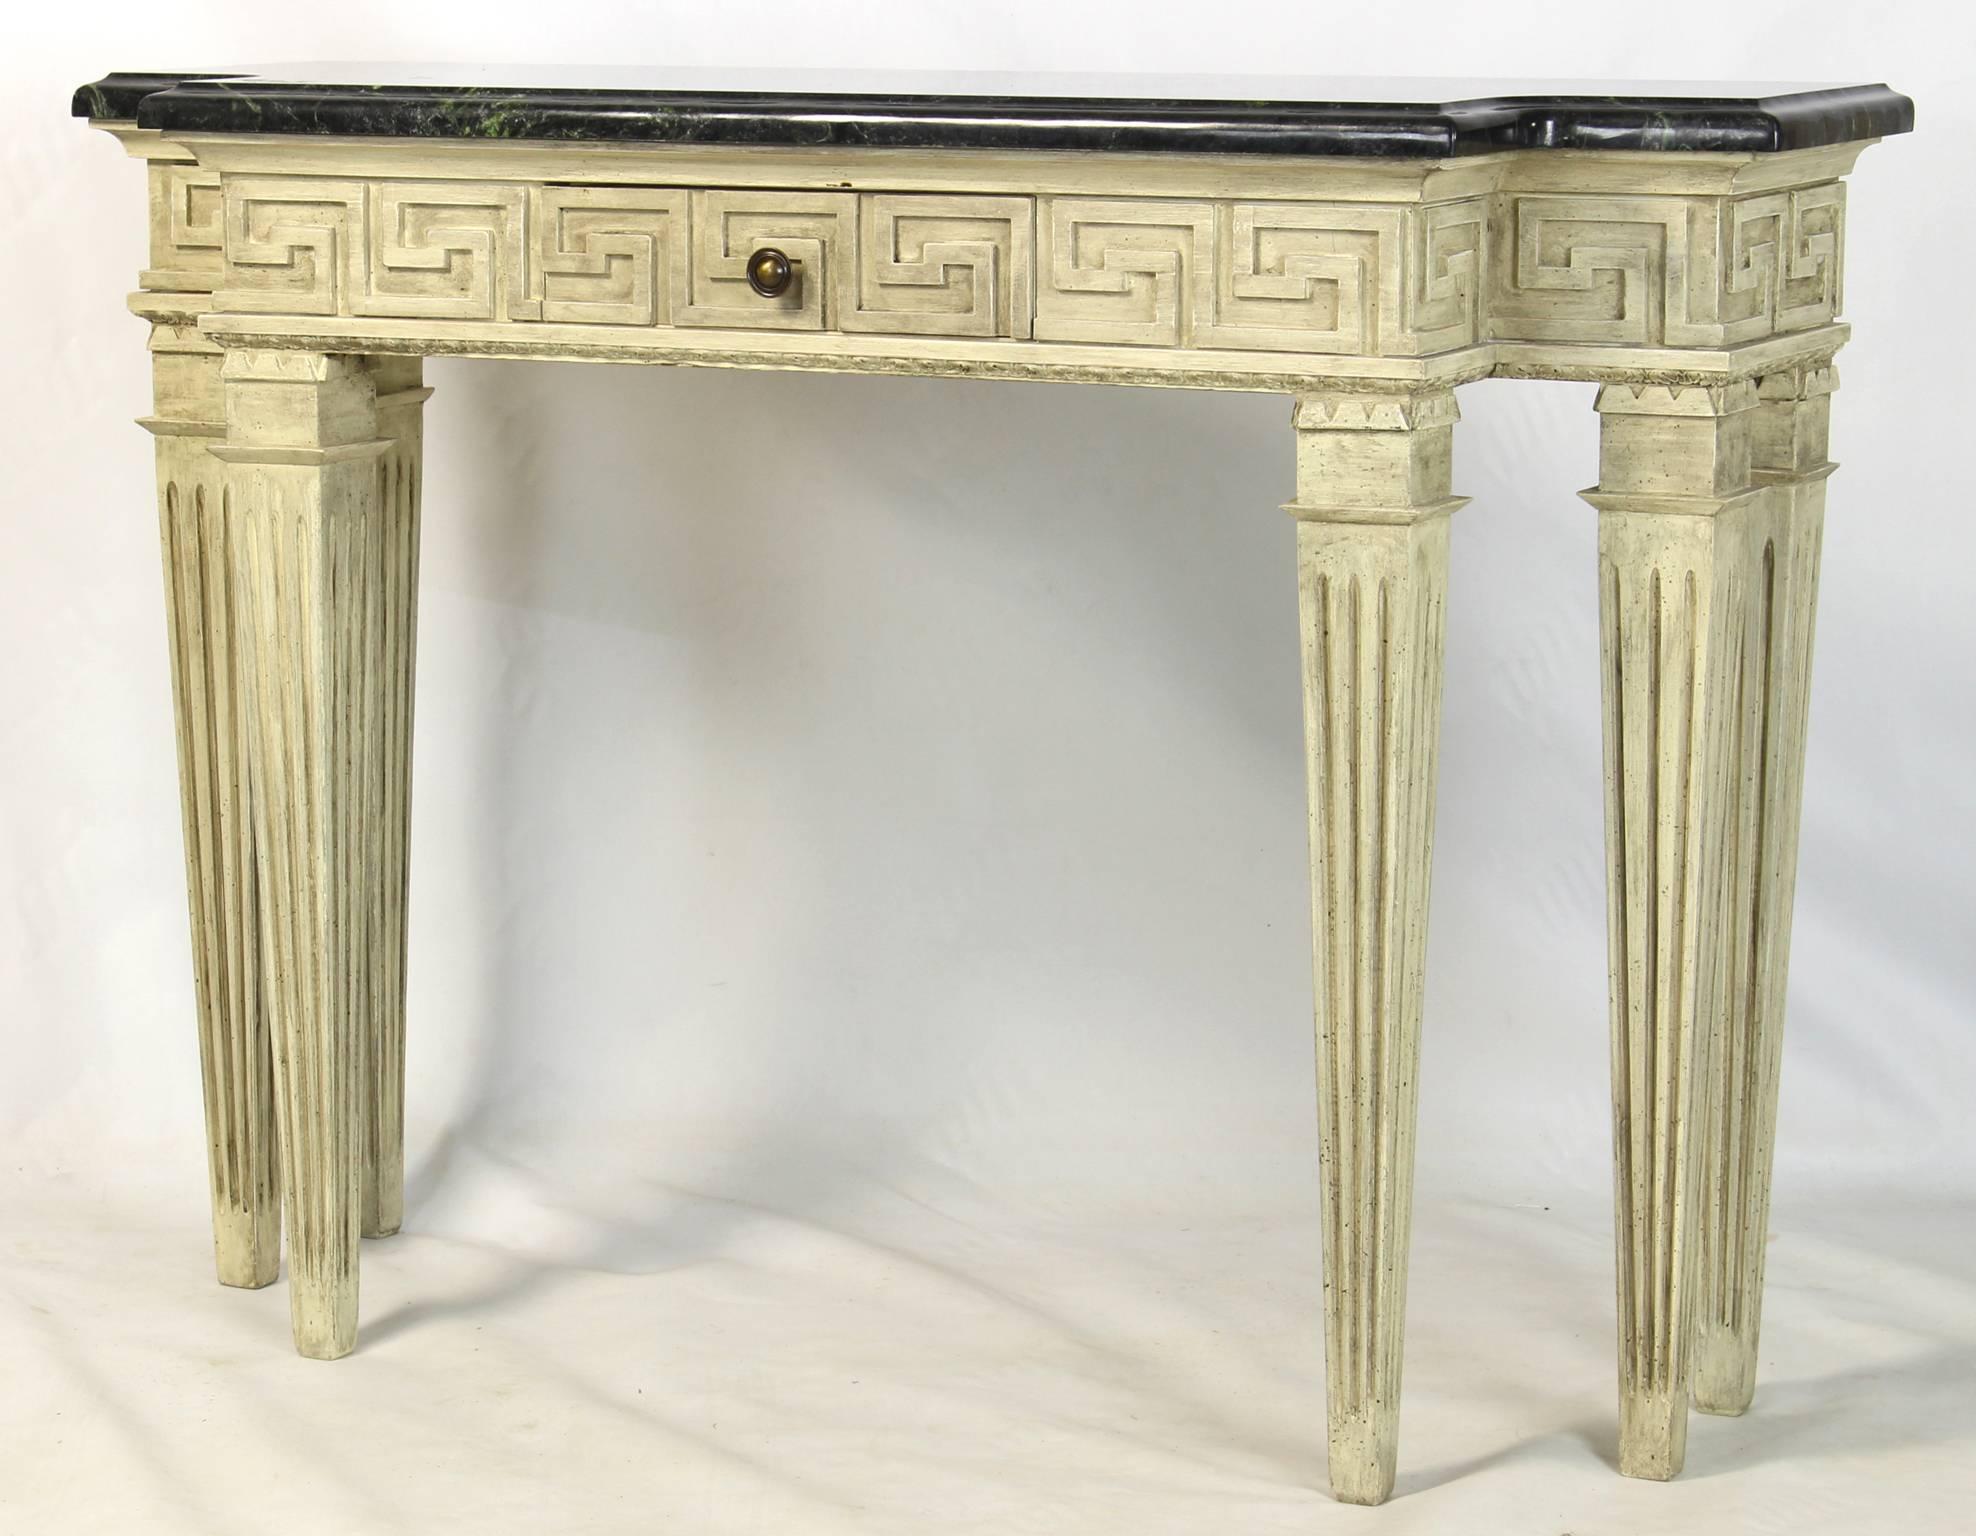 A custom designed six leg console table with Greek key decoration in a creamy gray paint finish and deep green marble top with single felt lined center drawer. 